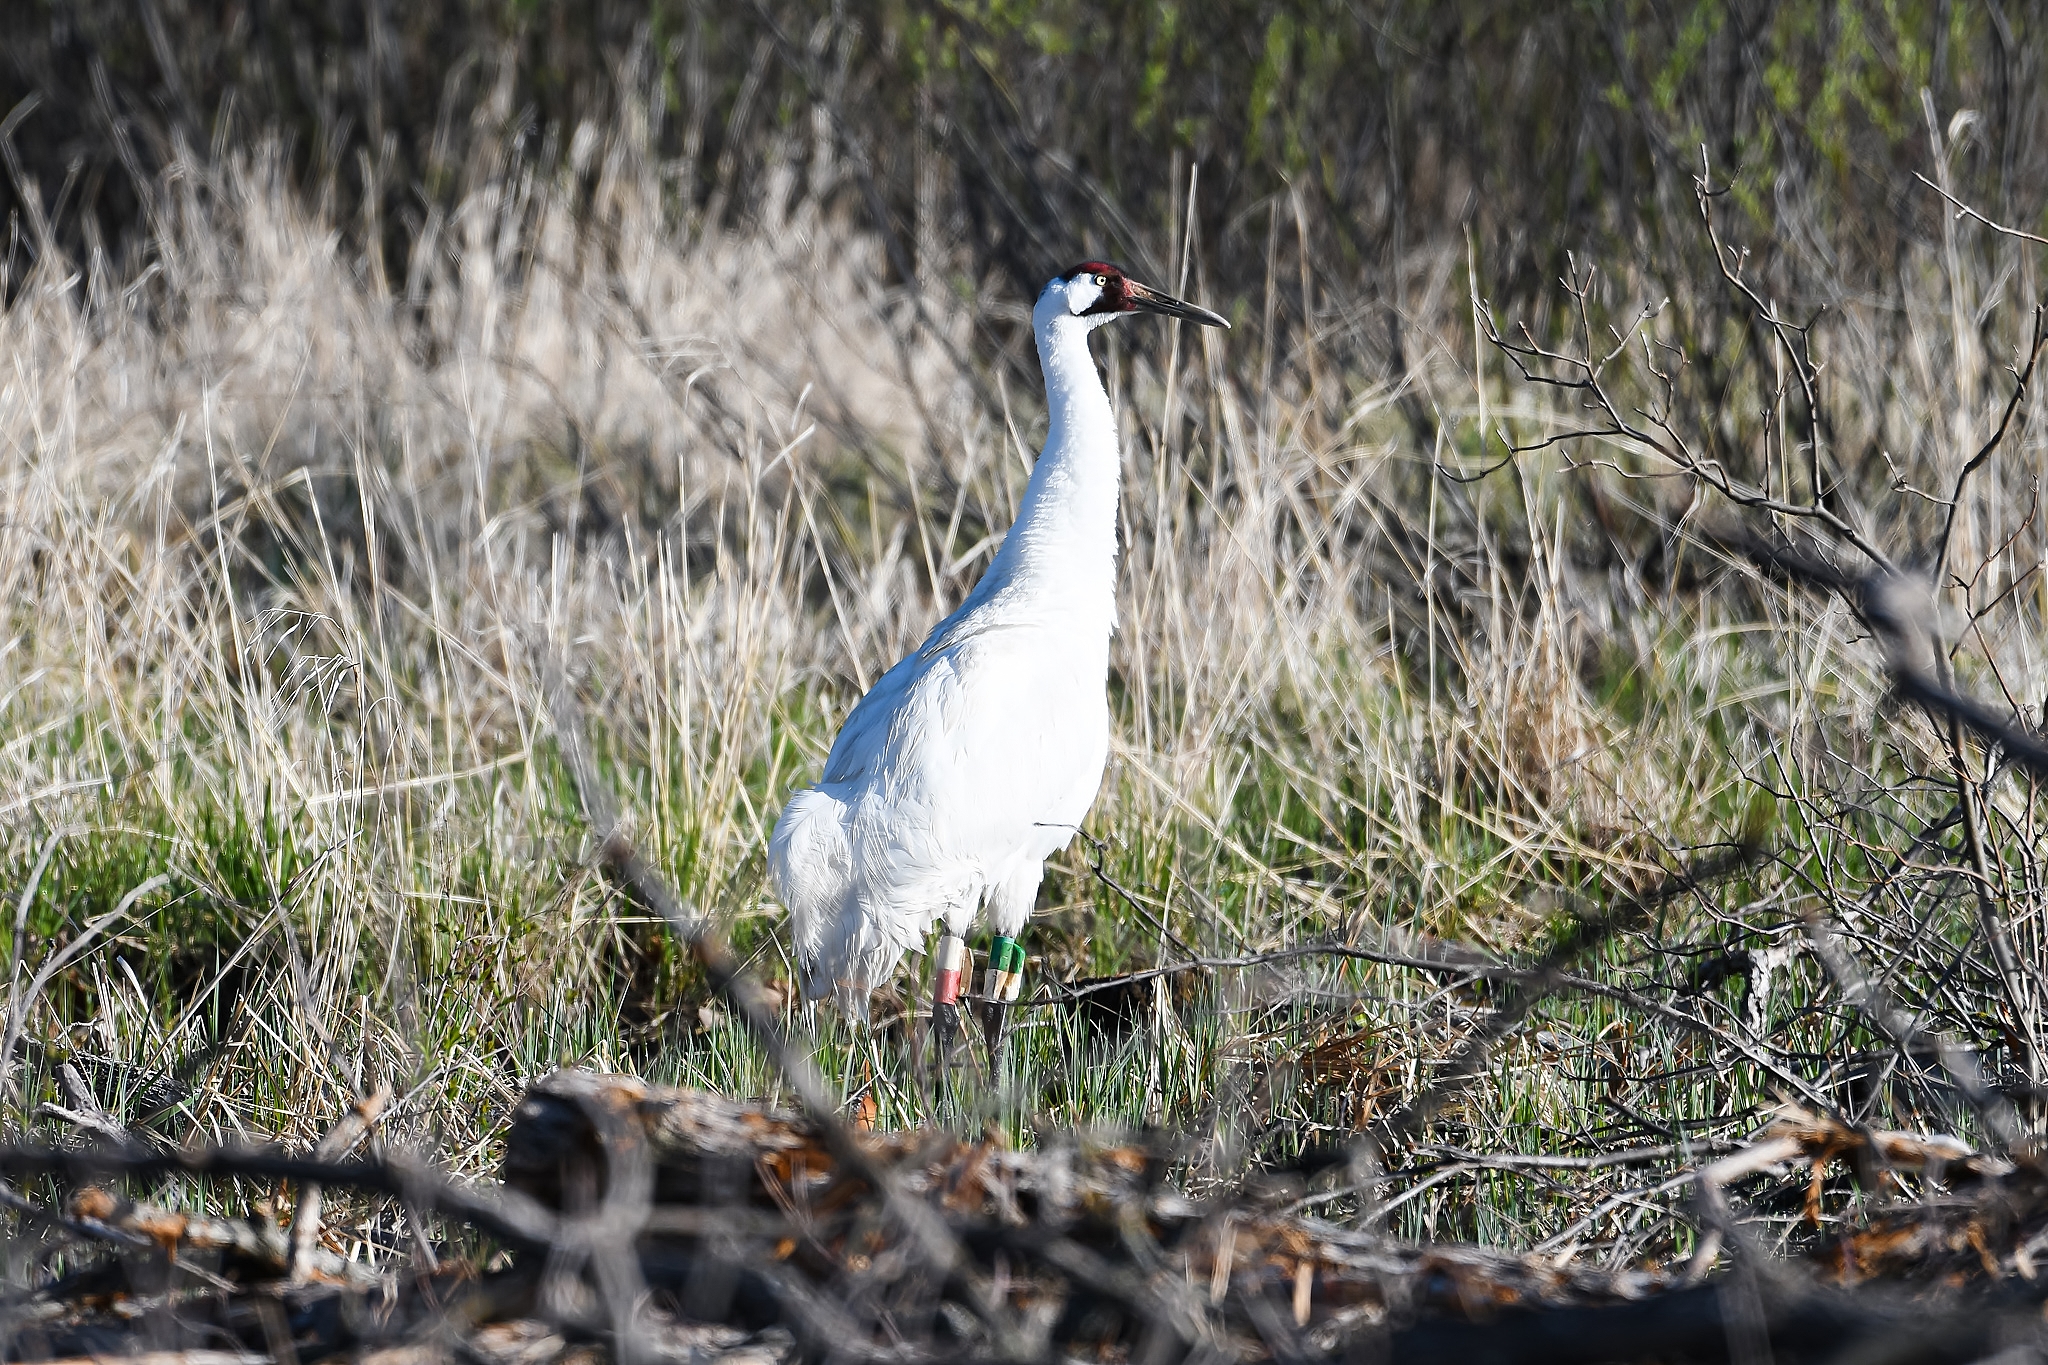 A pure white, adult Whooping Crane stands in tome scrubby vegetation. He looks alert.